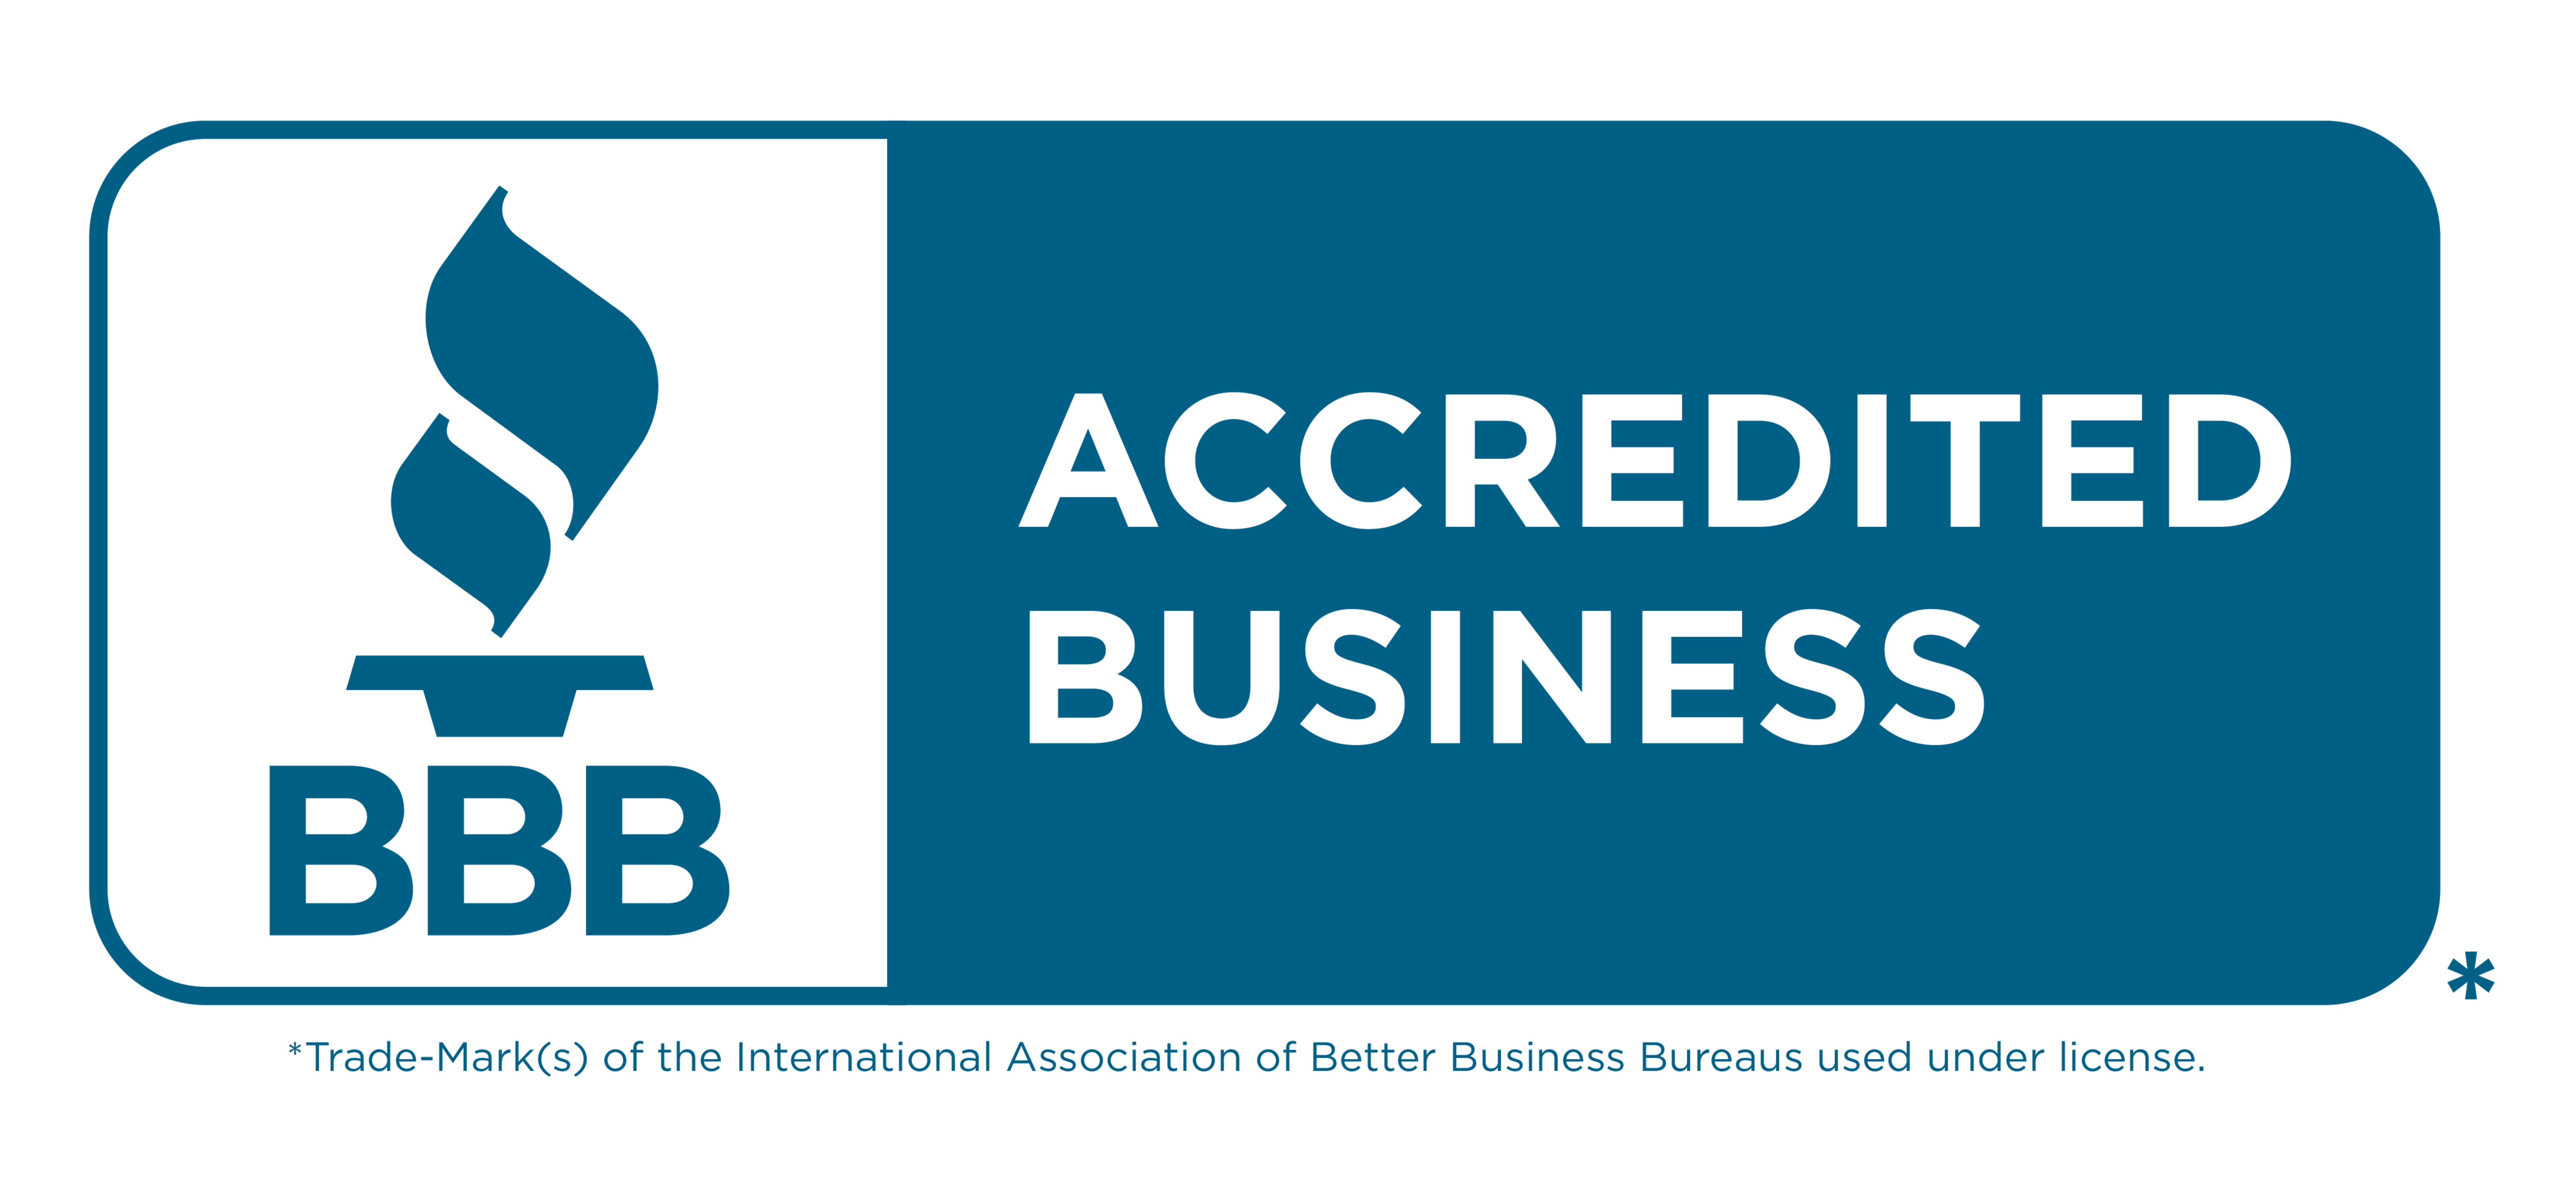 BBB Accredited Business Seal - Horizontal Blue